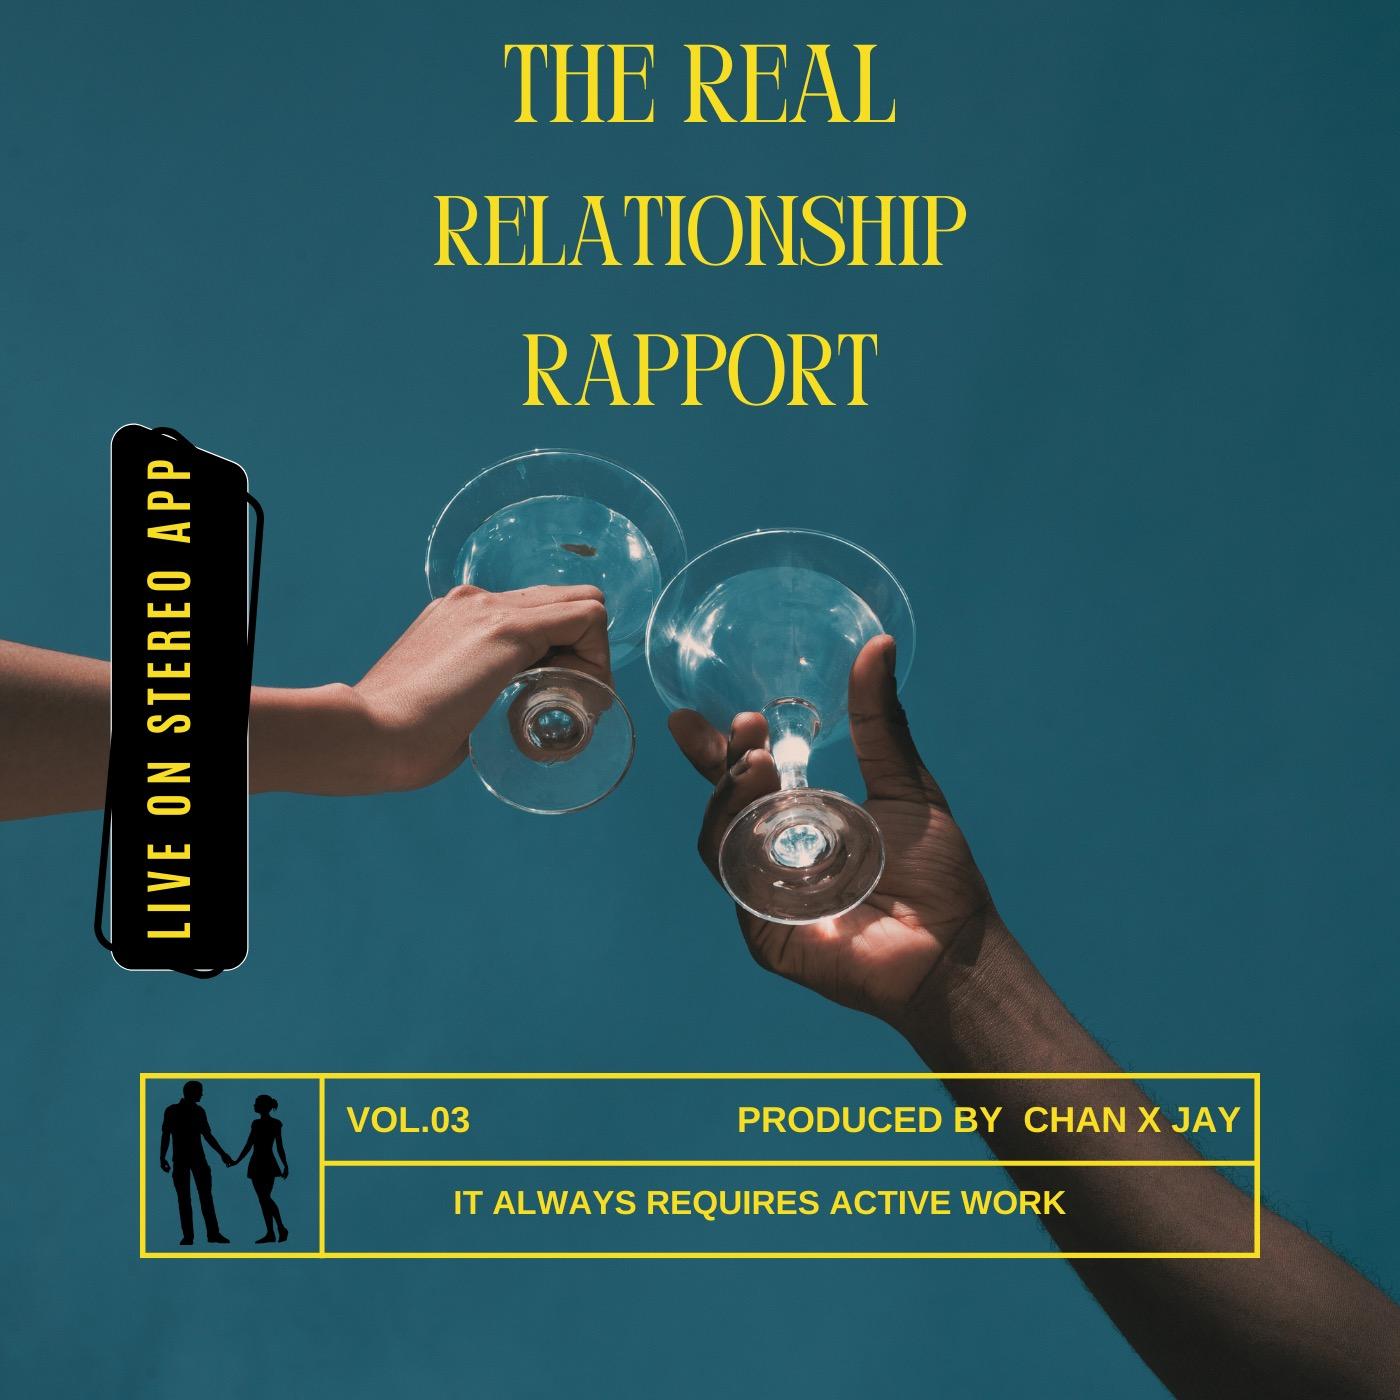 The Real Relationship Rapport